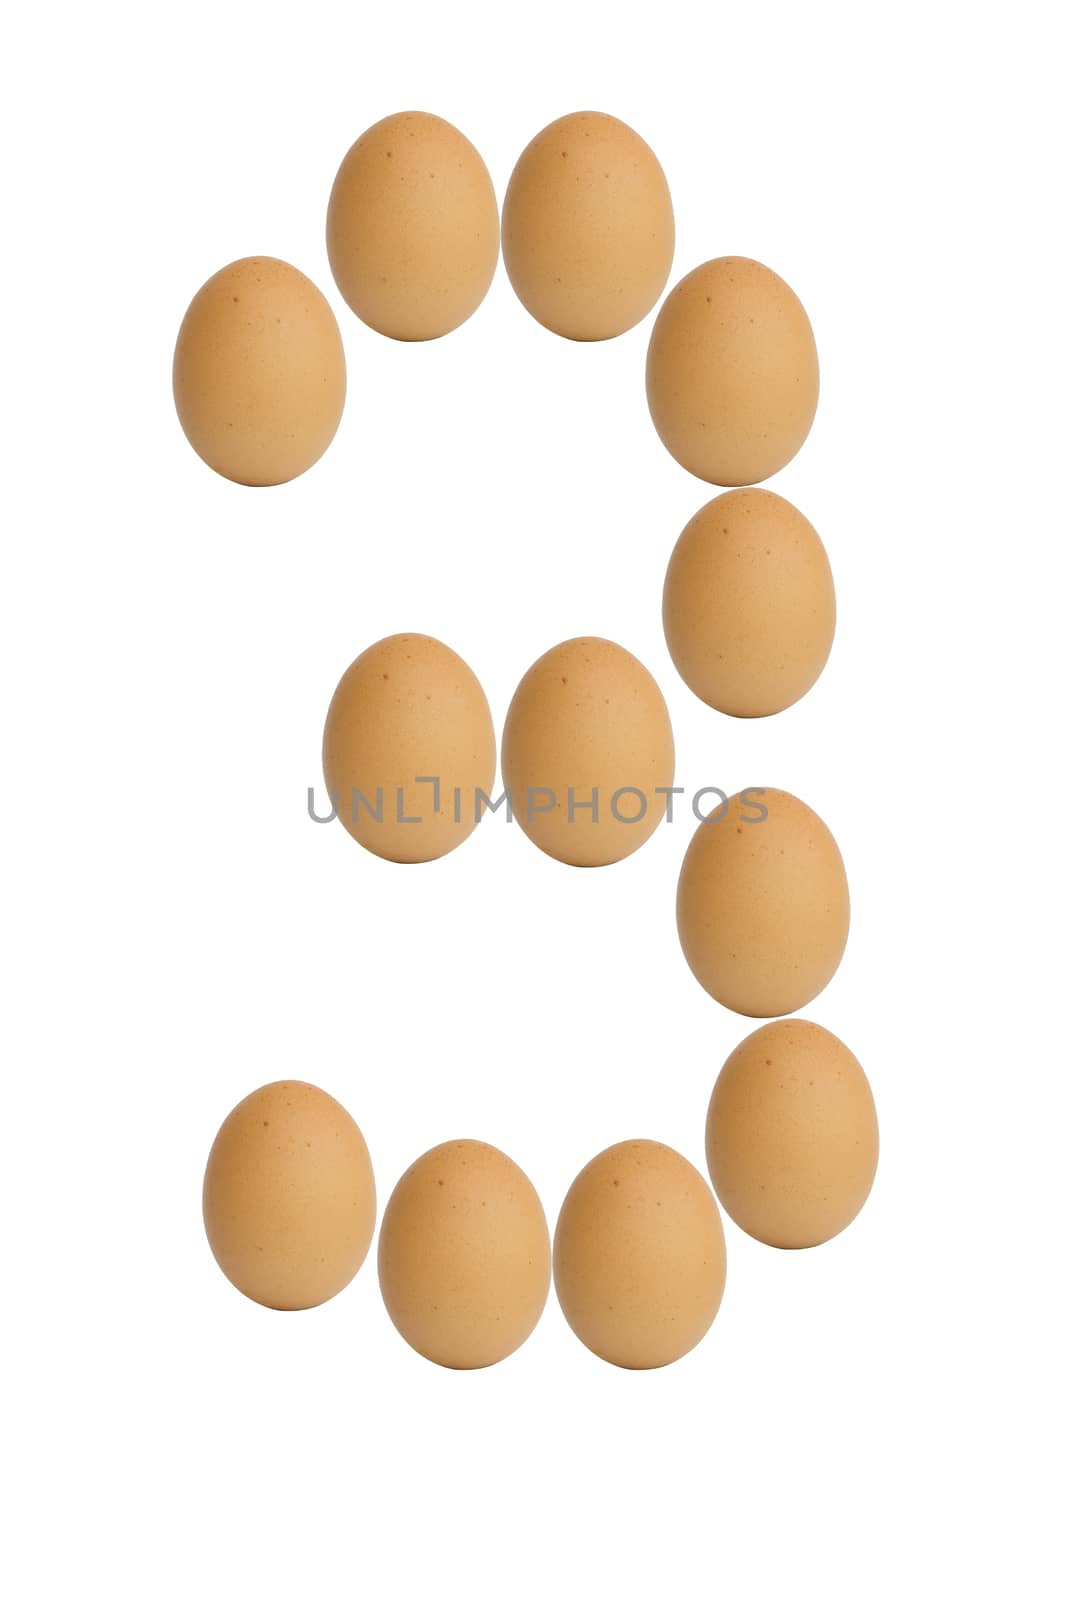 Number 0 to 9 from brown eggs alphabet isolated on white background, three